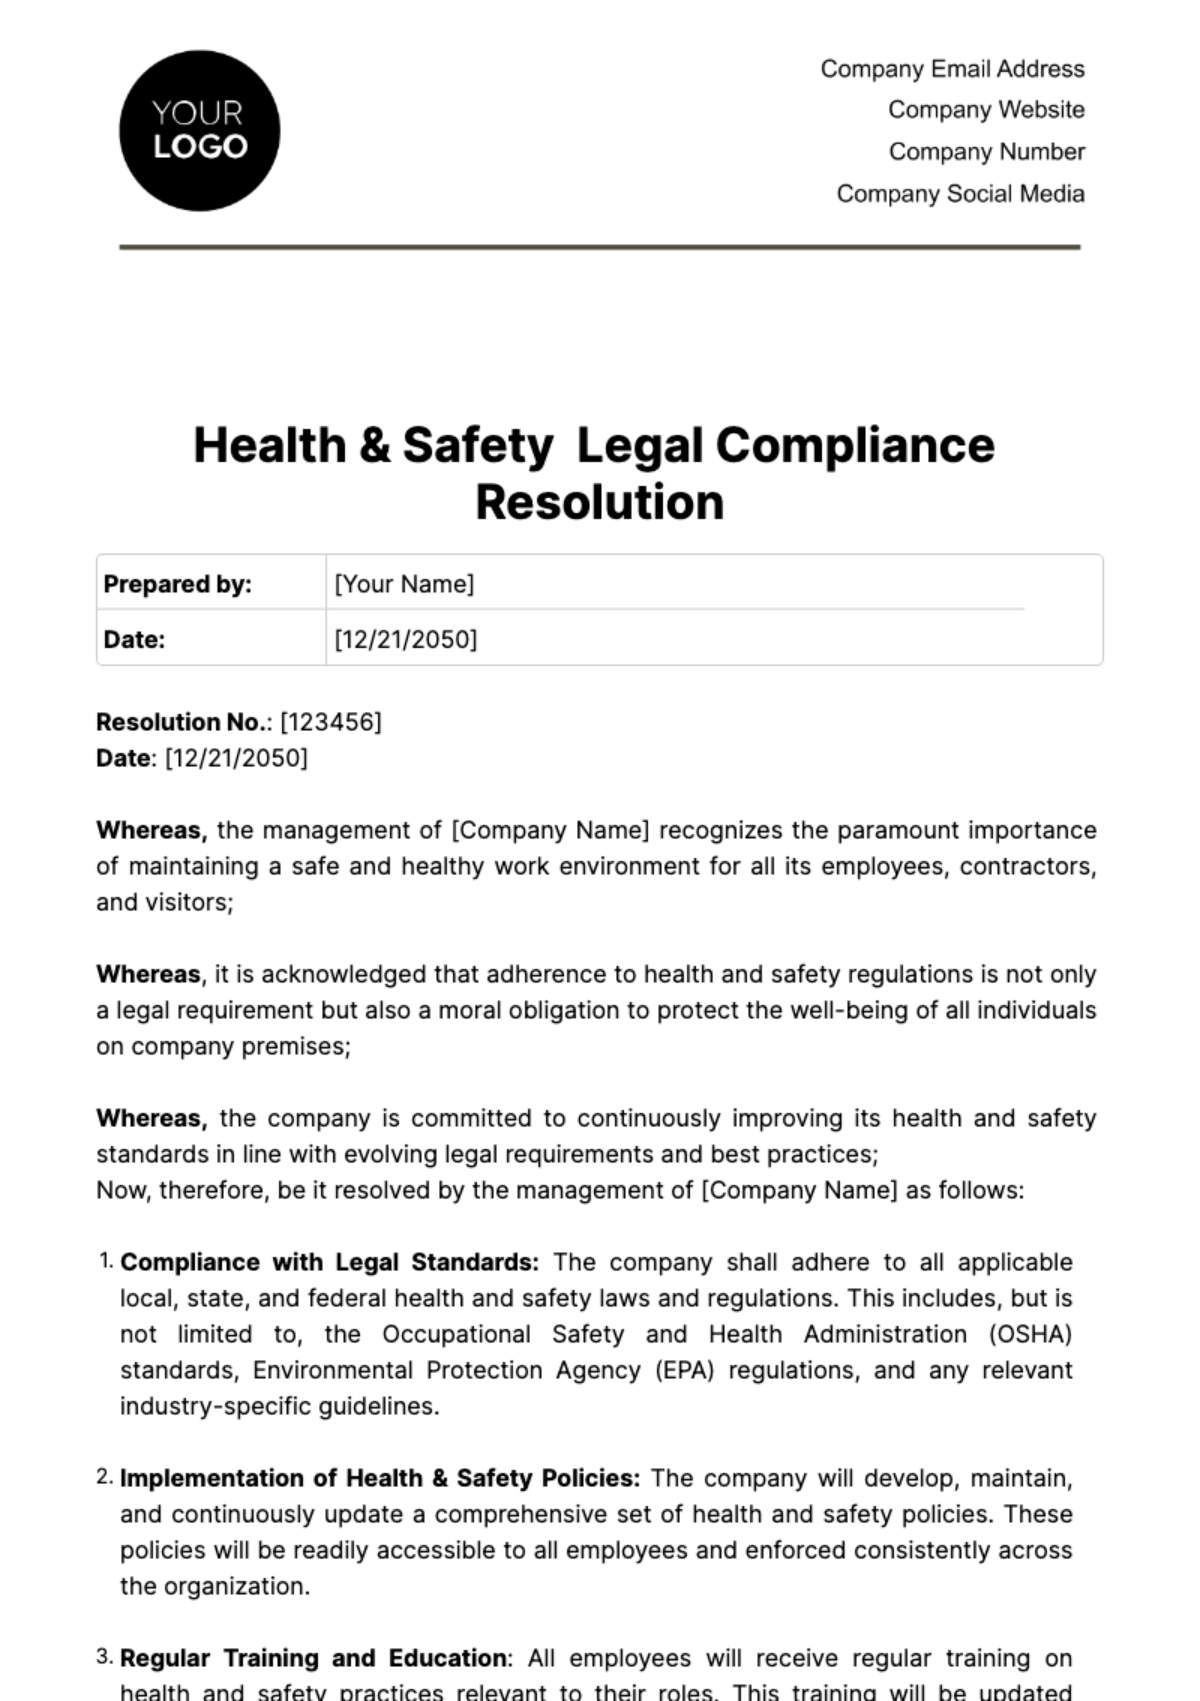 Health & Safety  Legal Compliance Resolution Template